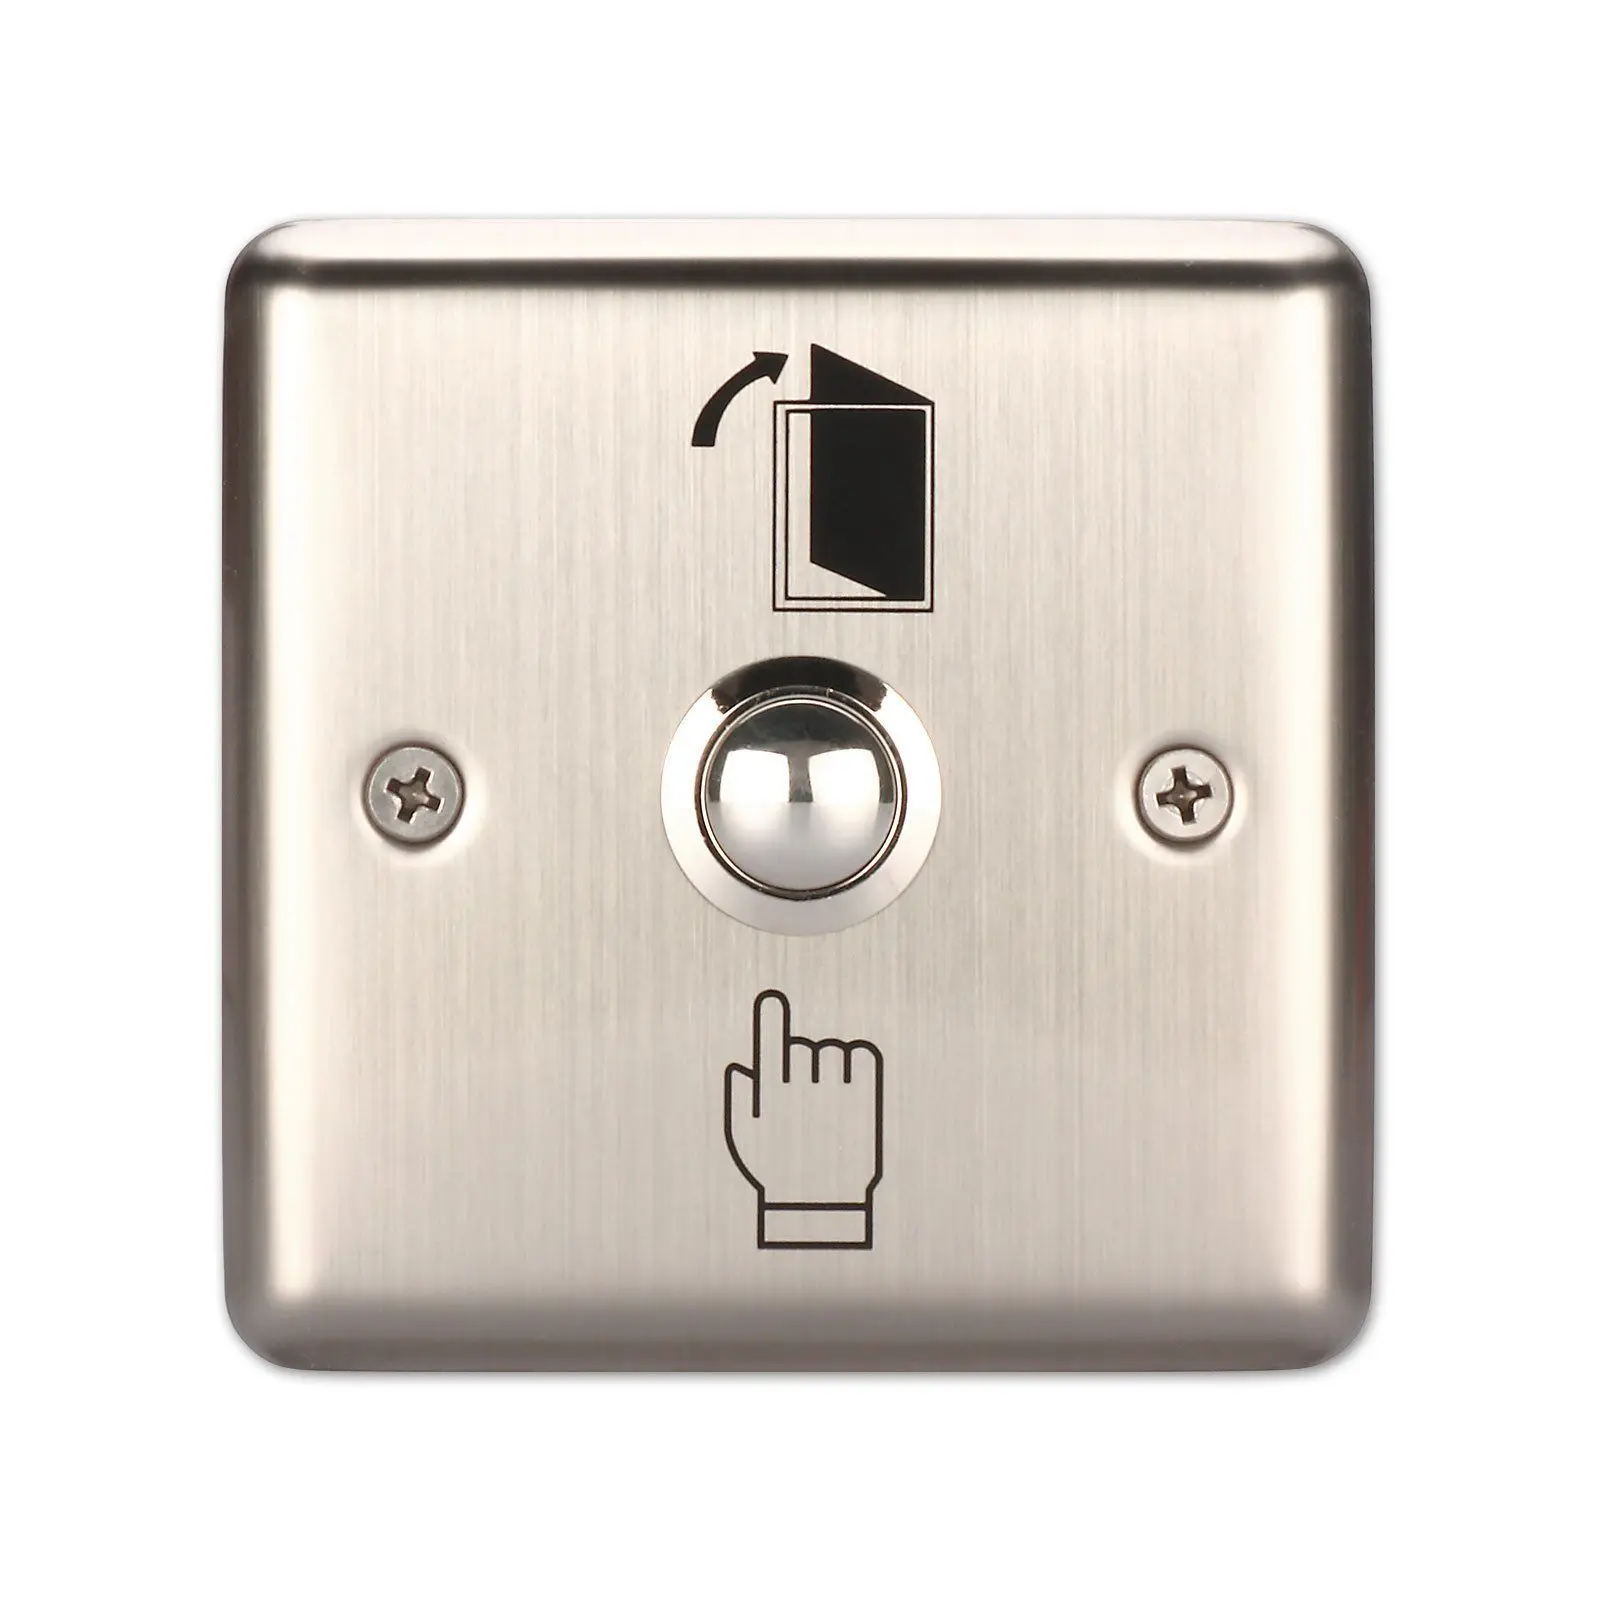 Stainless Steel Slim Exit Push Release Button For Access Control Door Switch Kit 